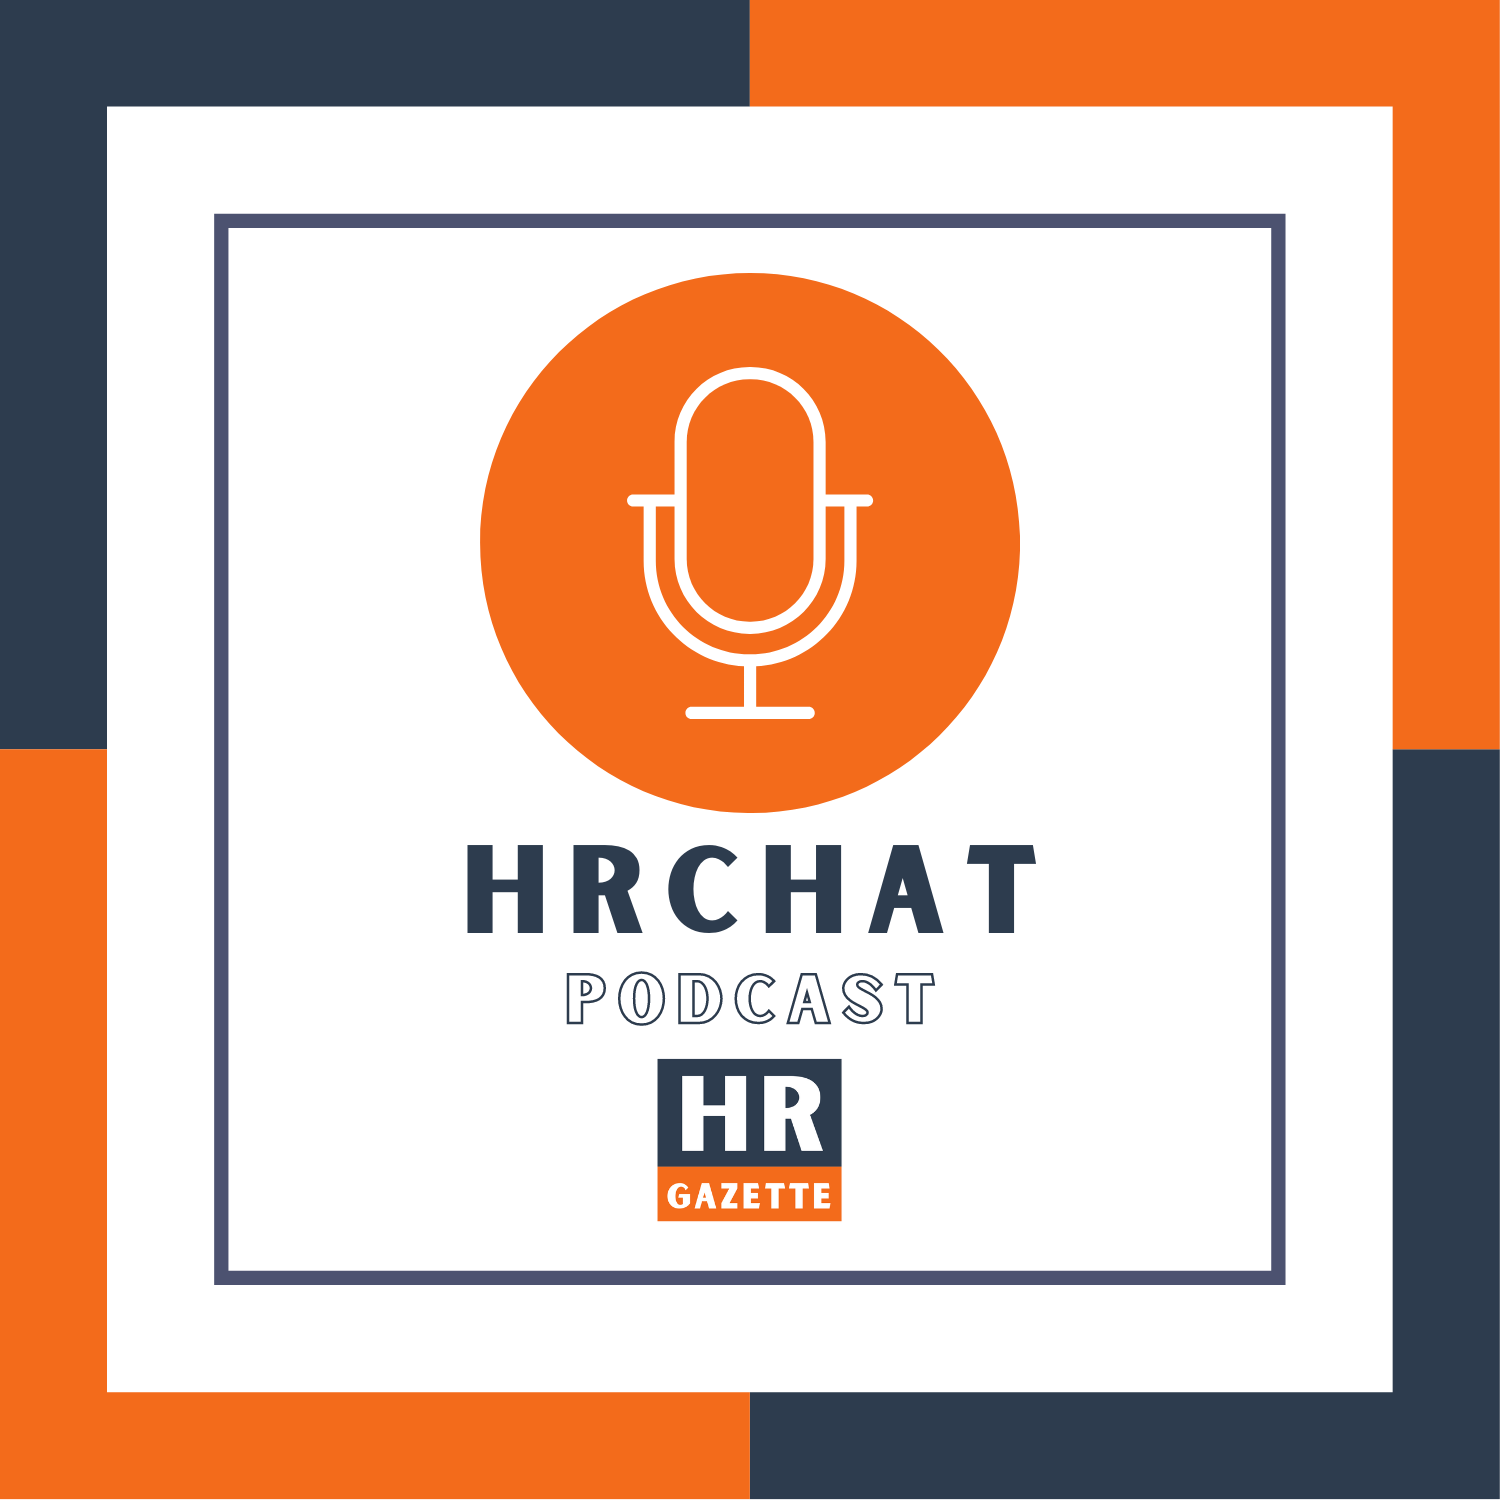 HRchat Podcast